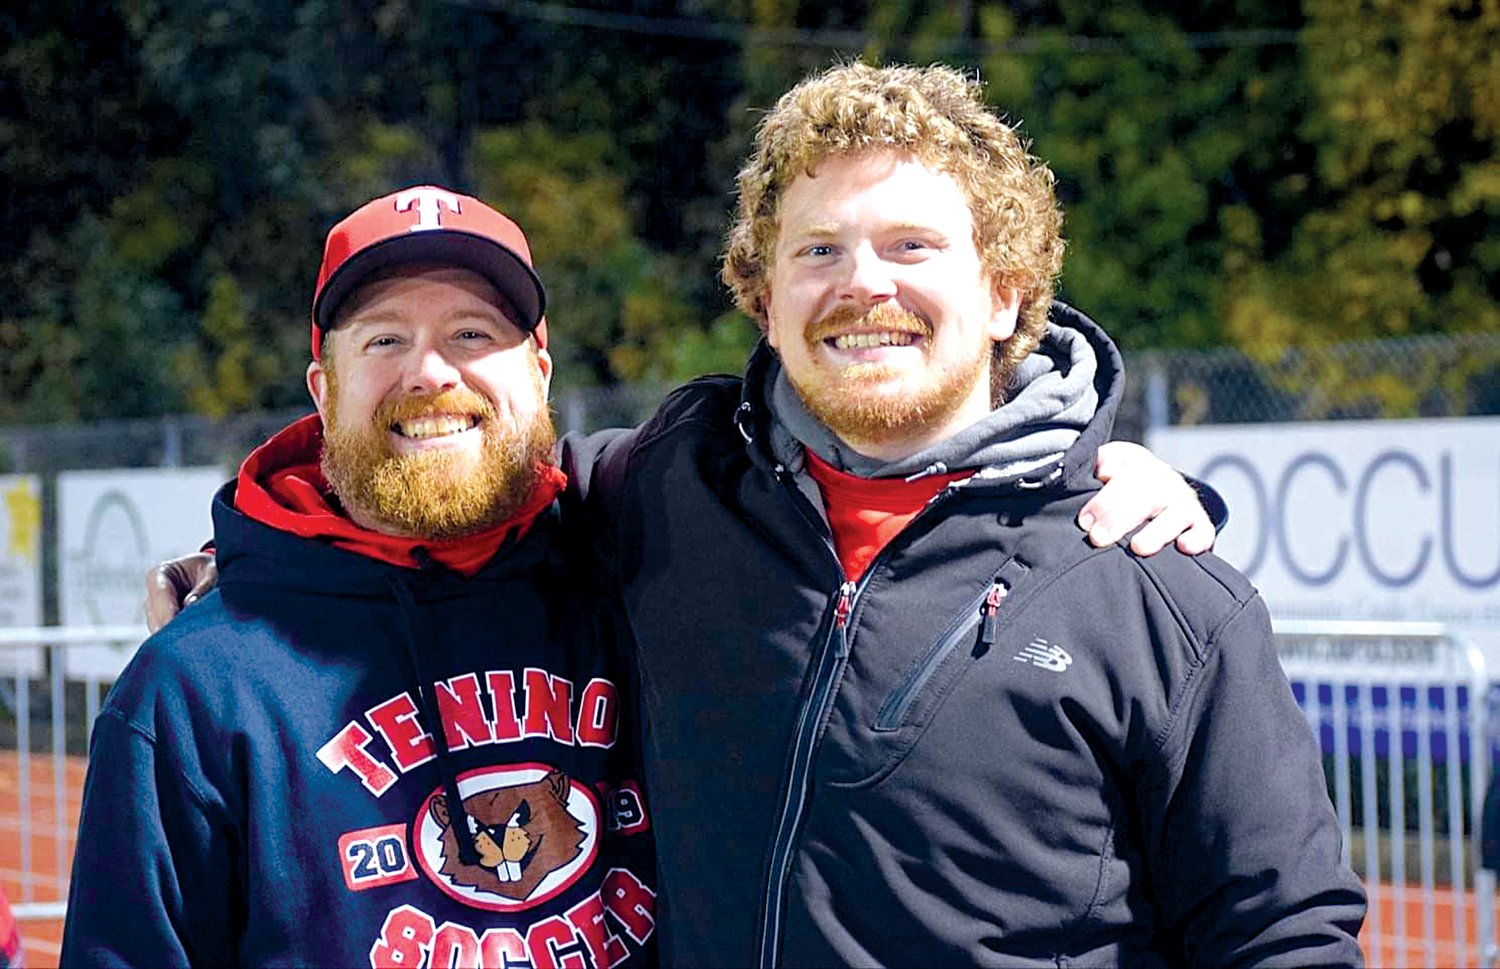 Dave Montgomery (left) and Kevin Schultz (right) pose for a photo while coaching the Tenino High School girls soccer team. Montgomery has been hired to take over for Schultz as the Beavers’ head coach after Schultz accepted a head coaching position with South Puget Sound Community College.